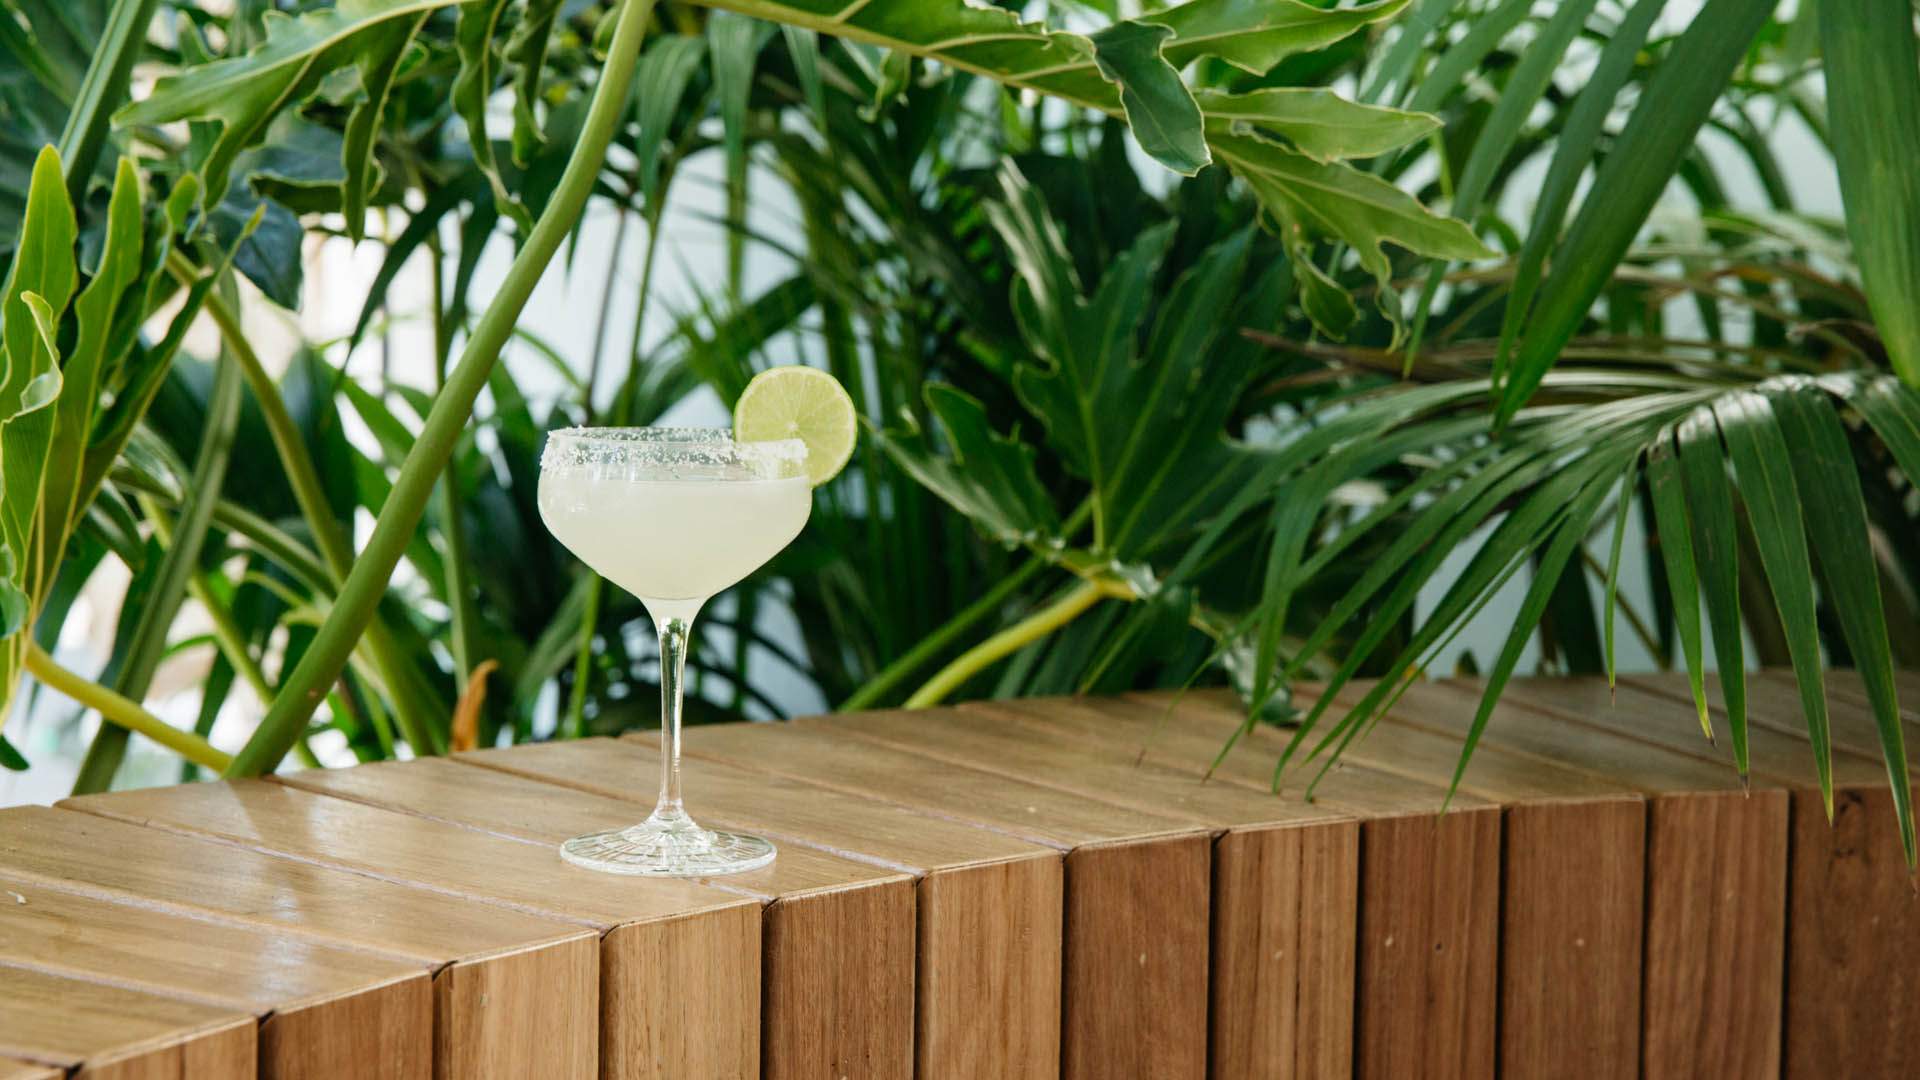 Melbourne's Fonda Mexican Has Just Launched Its First Sydney Venue